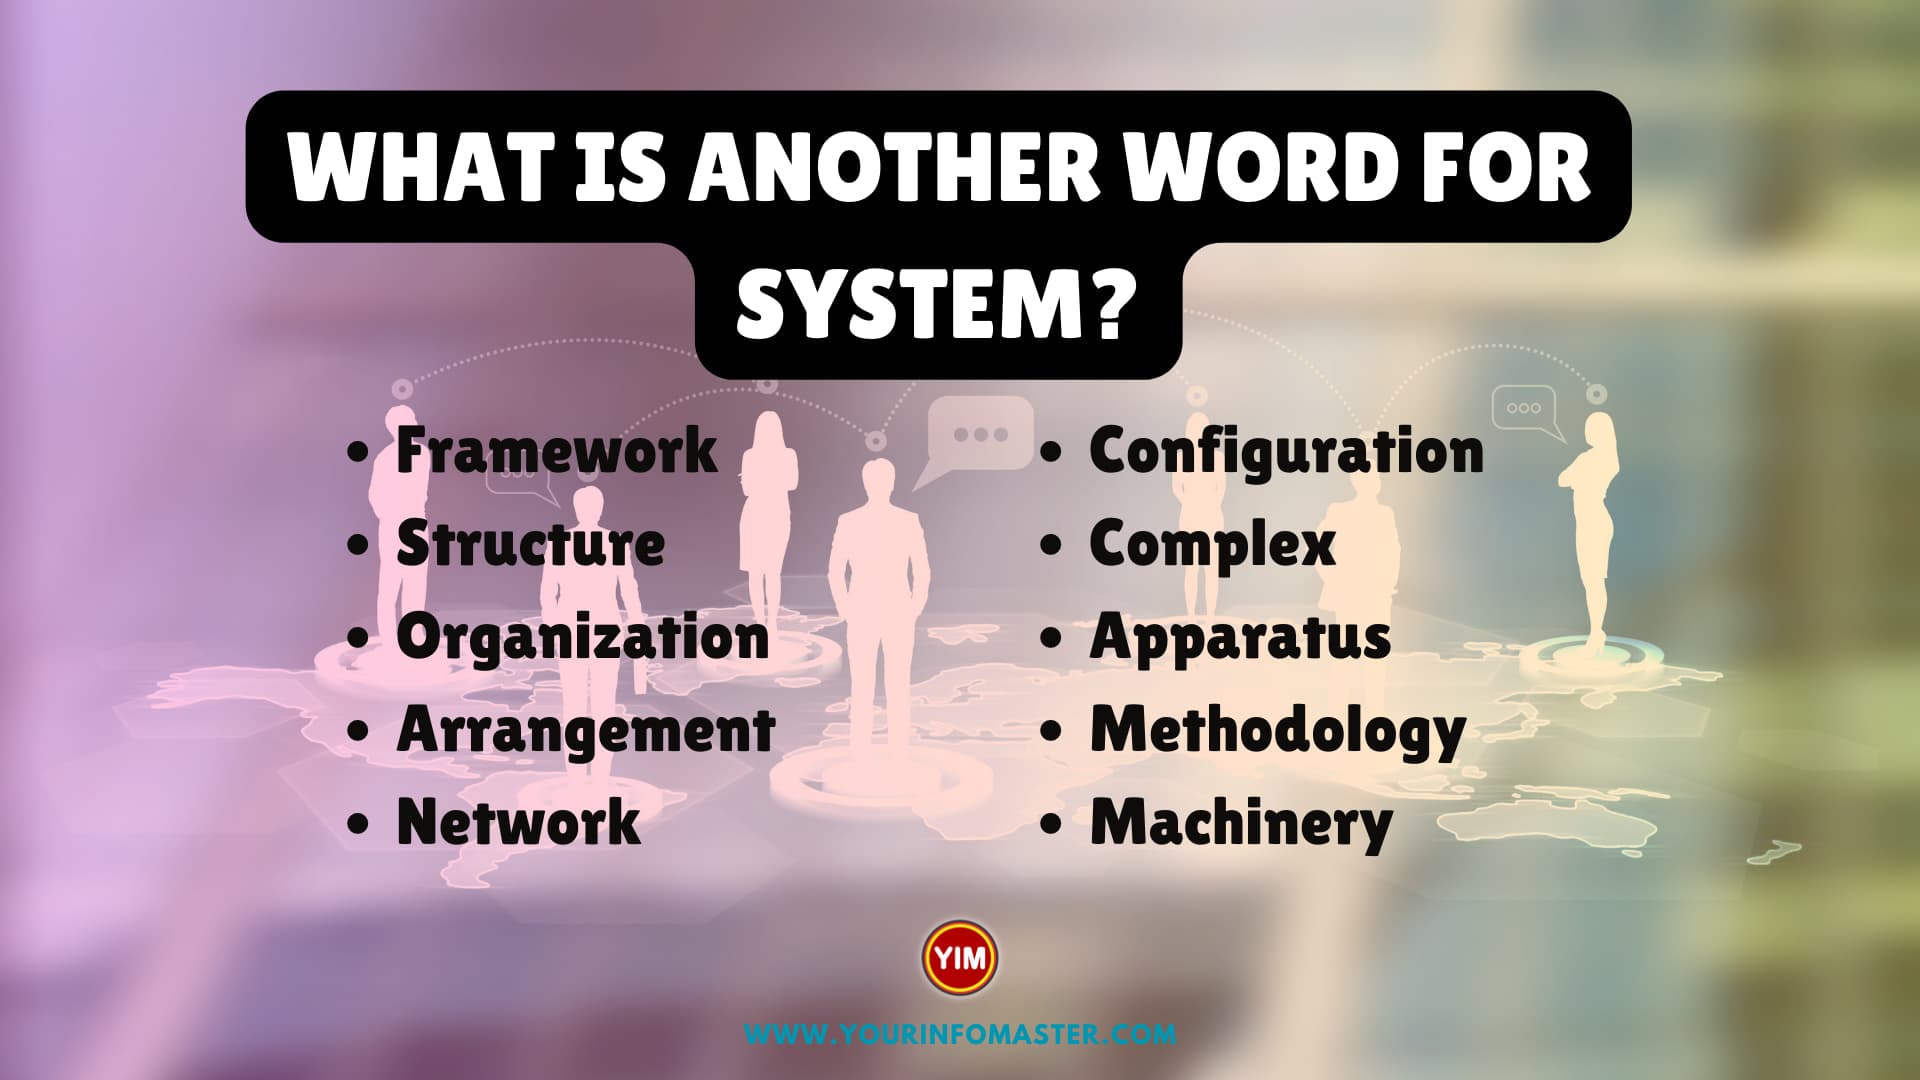 What is another word for System